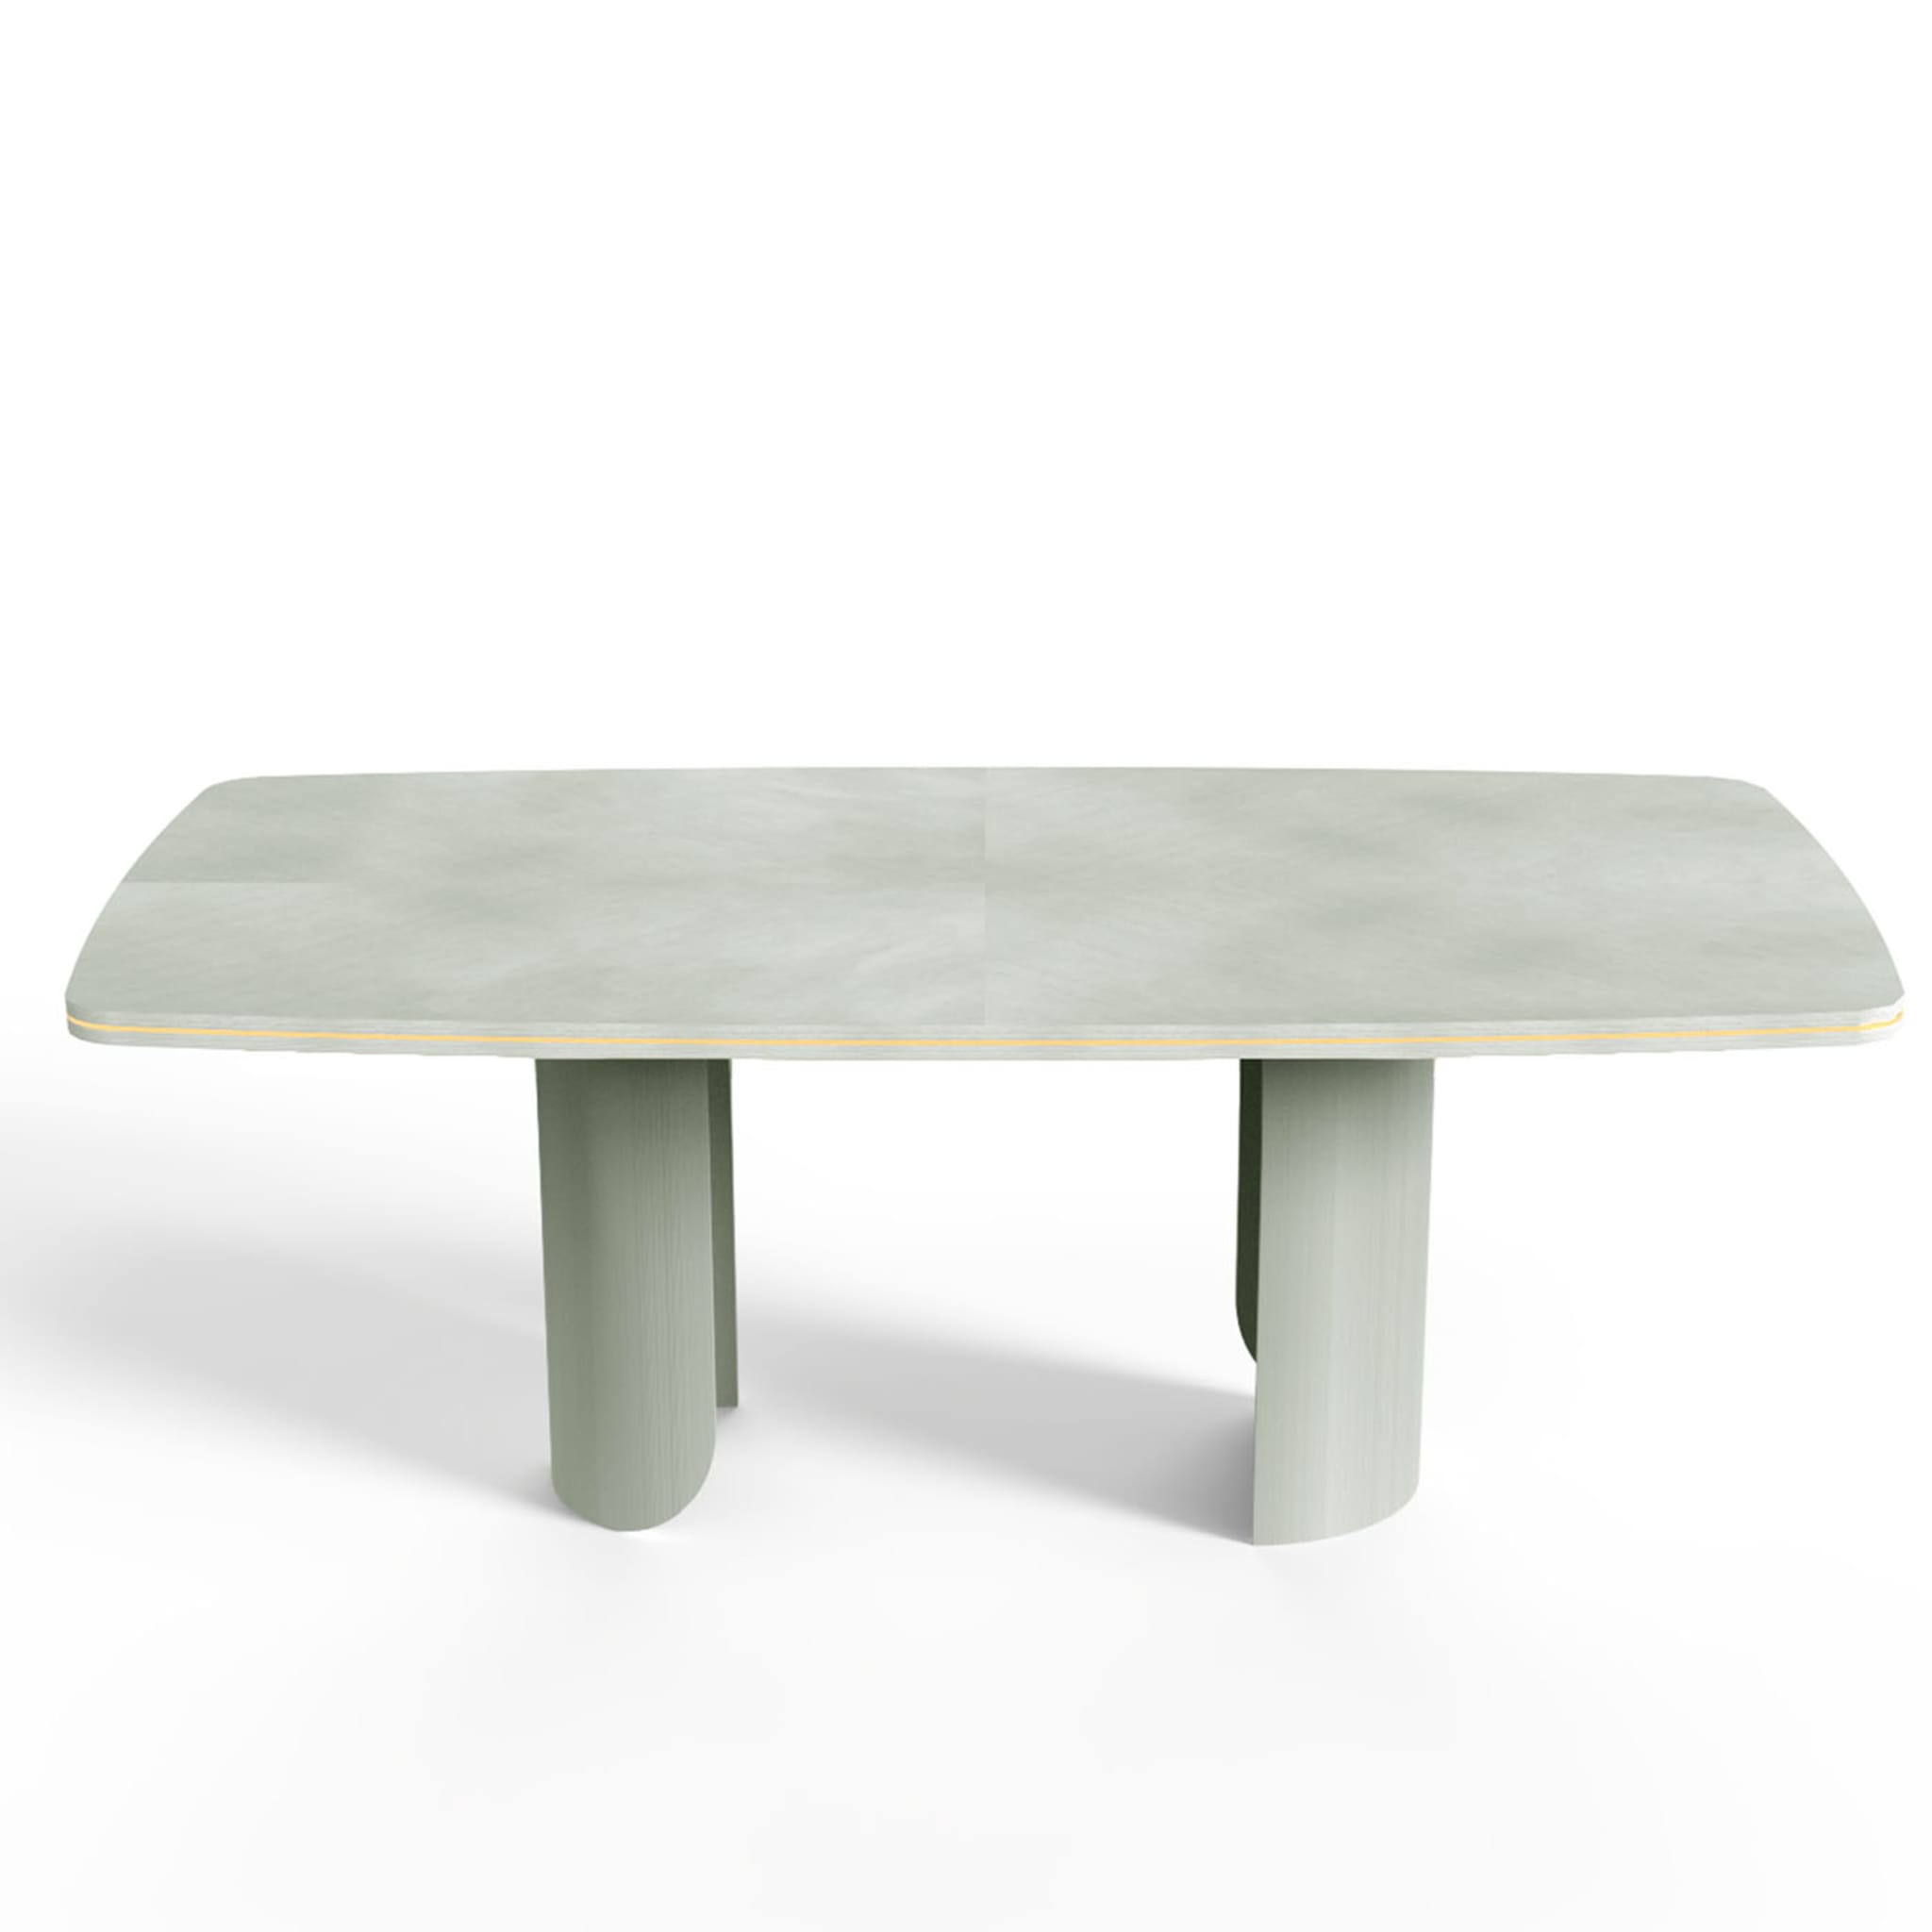 Edo Extendable Sage-Green Dining Table  - Alternative view 1